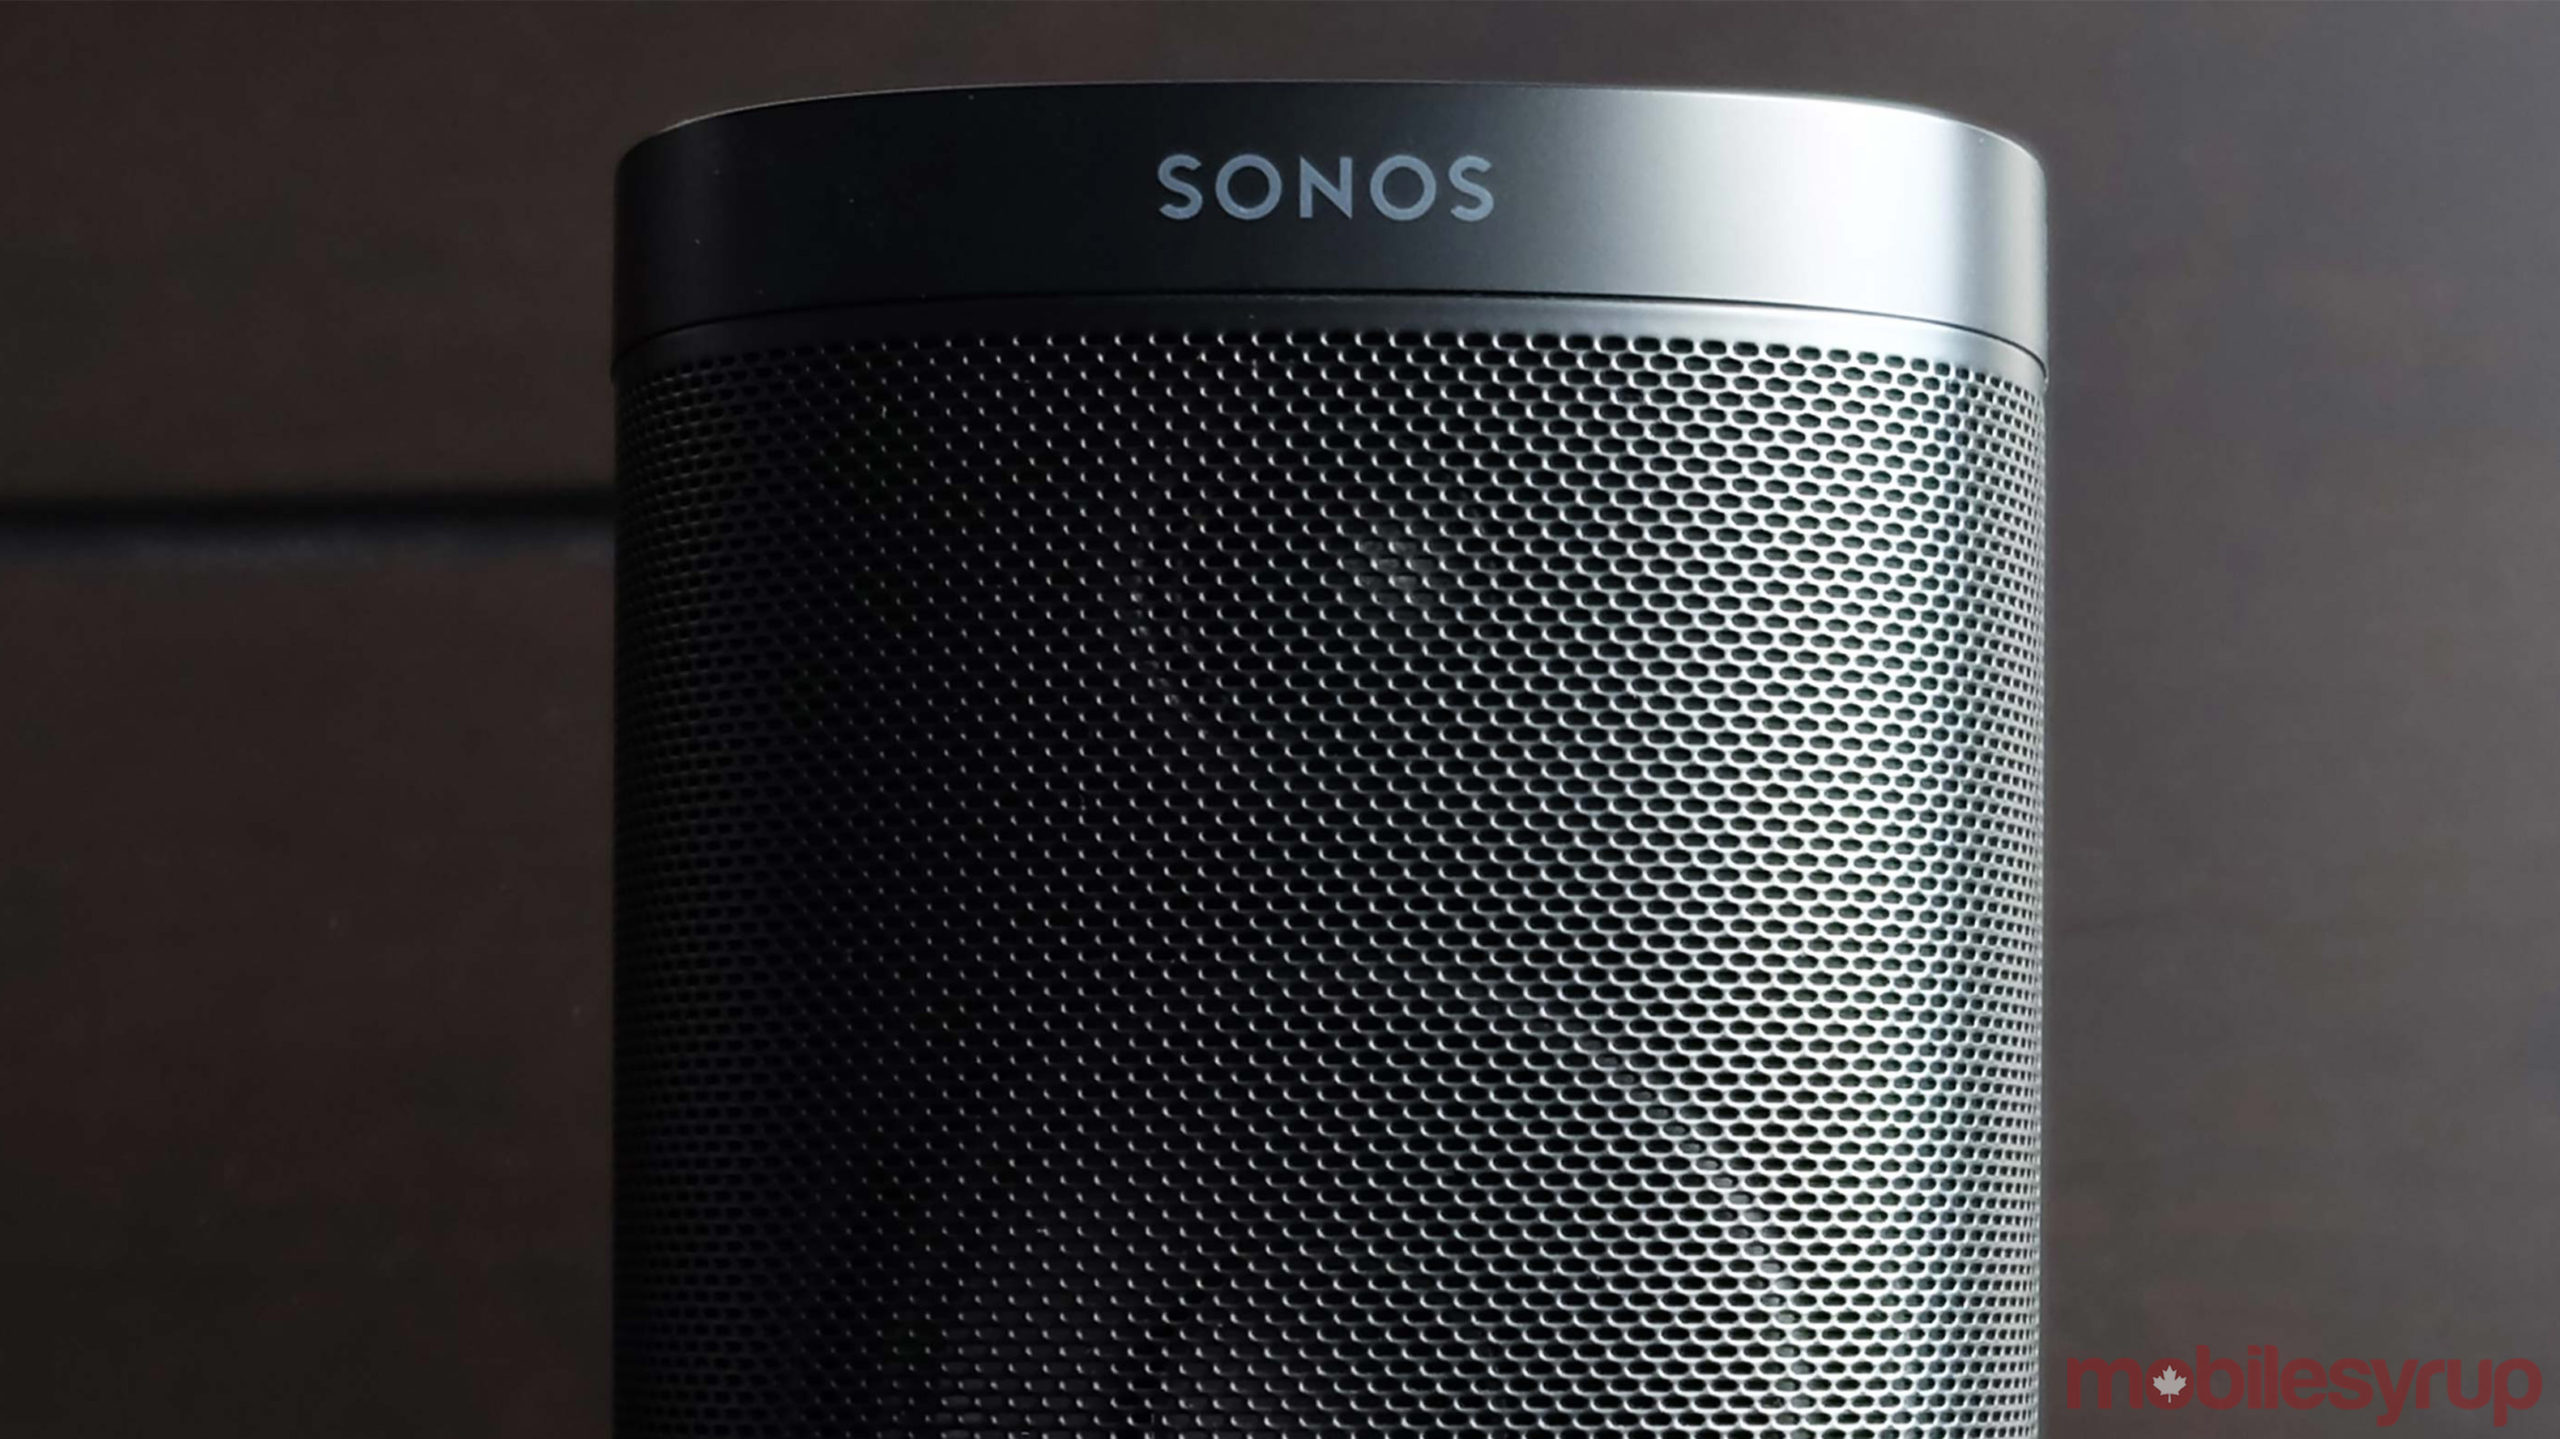 music software compatible with sonos